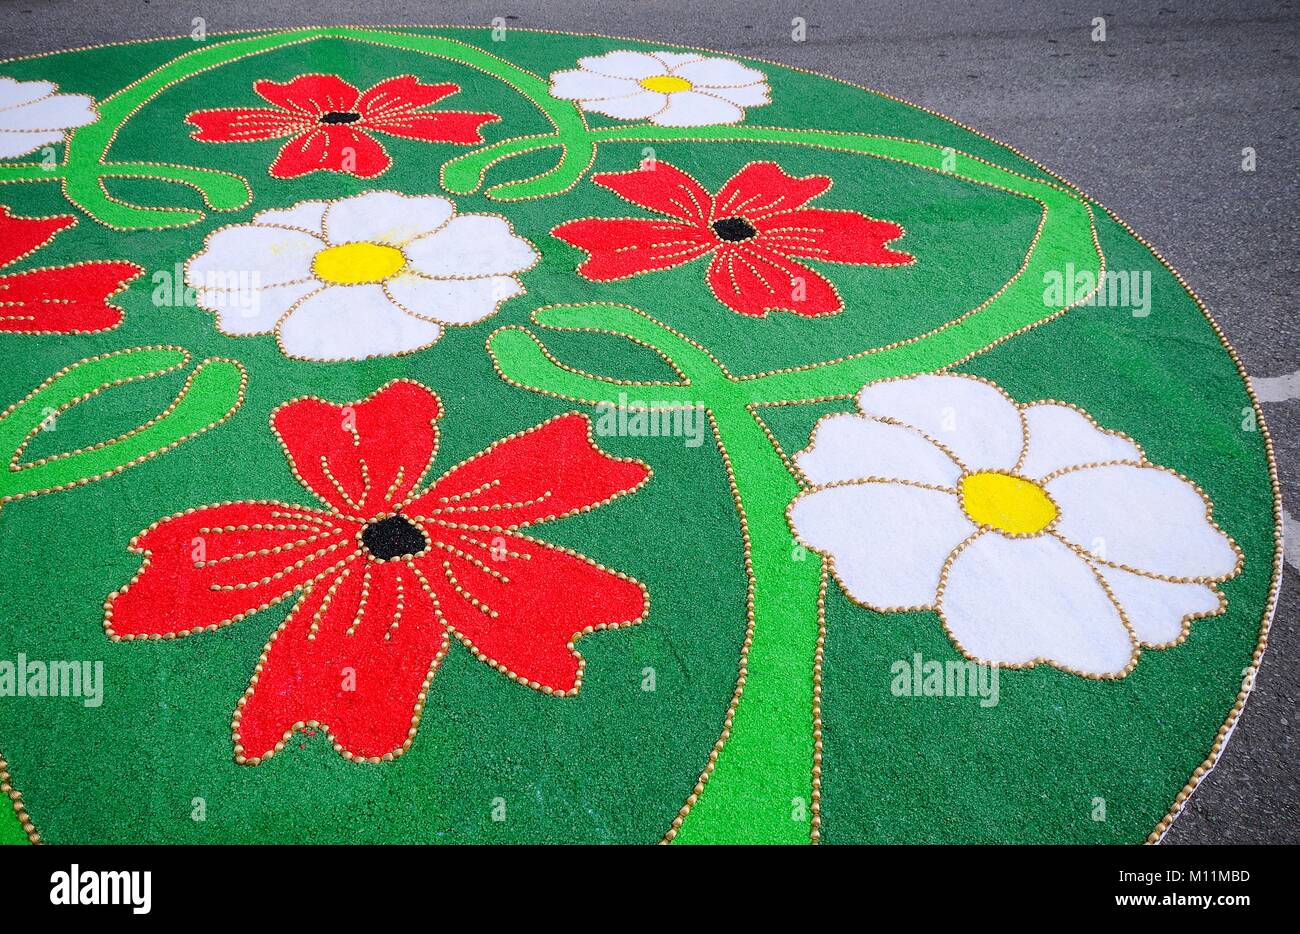 PRAVIA, SPAIN - JUNE 4: Carpets of flowers for the celebration of Corpus Christi  in June 4, 2015 in Pravia, Spain. During the past two months, fifty  Stock Photo